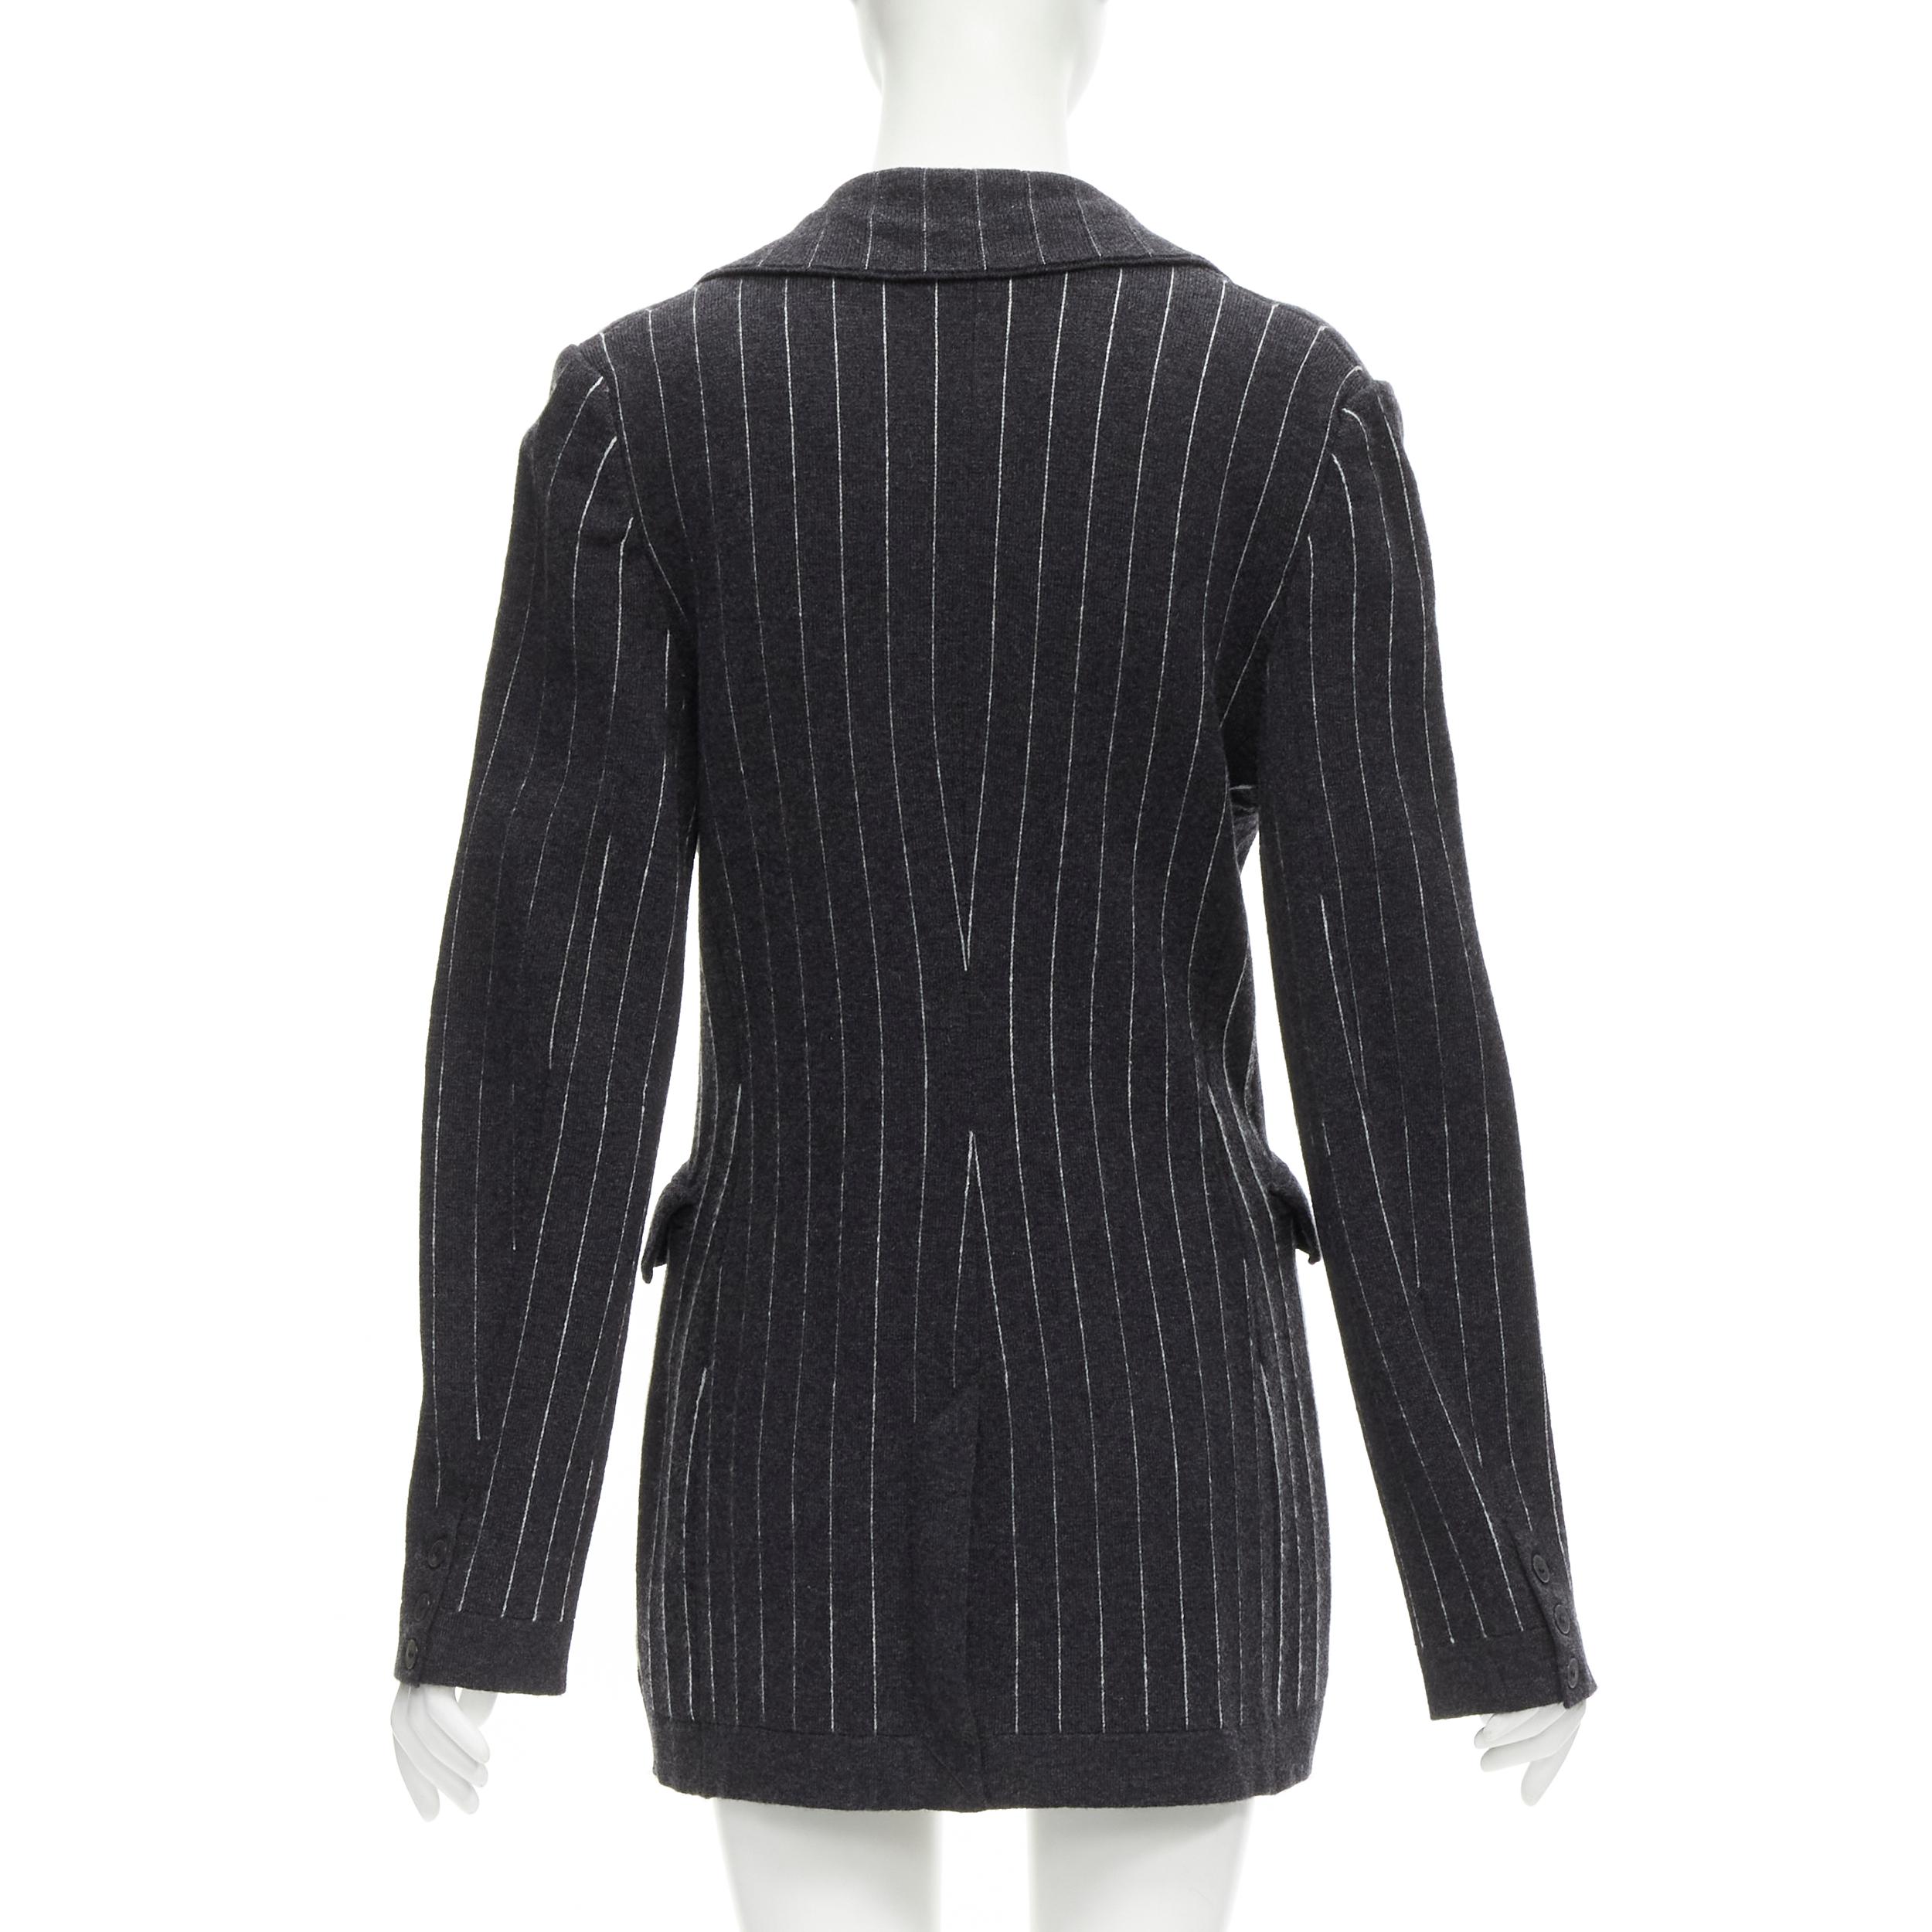 BARRIE 100% pure cashmere dark grey pinstriped double breasted blazer cardigan S For Sale 1